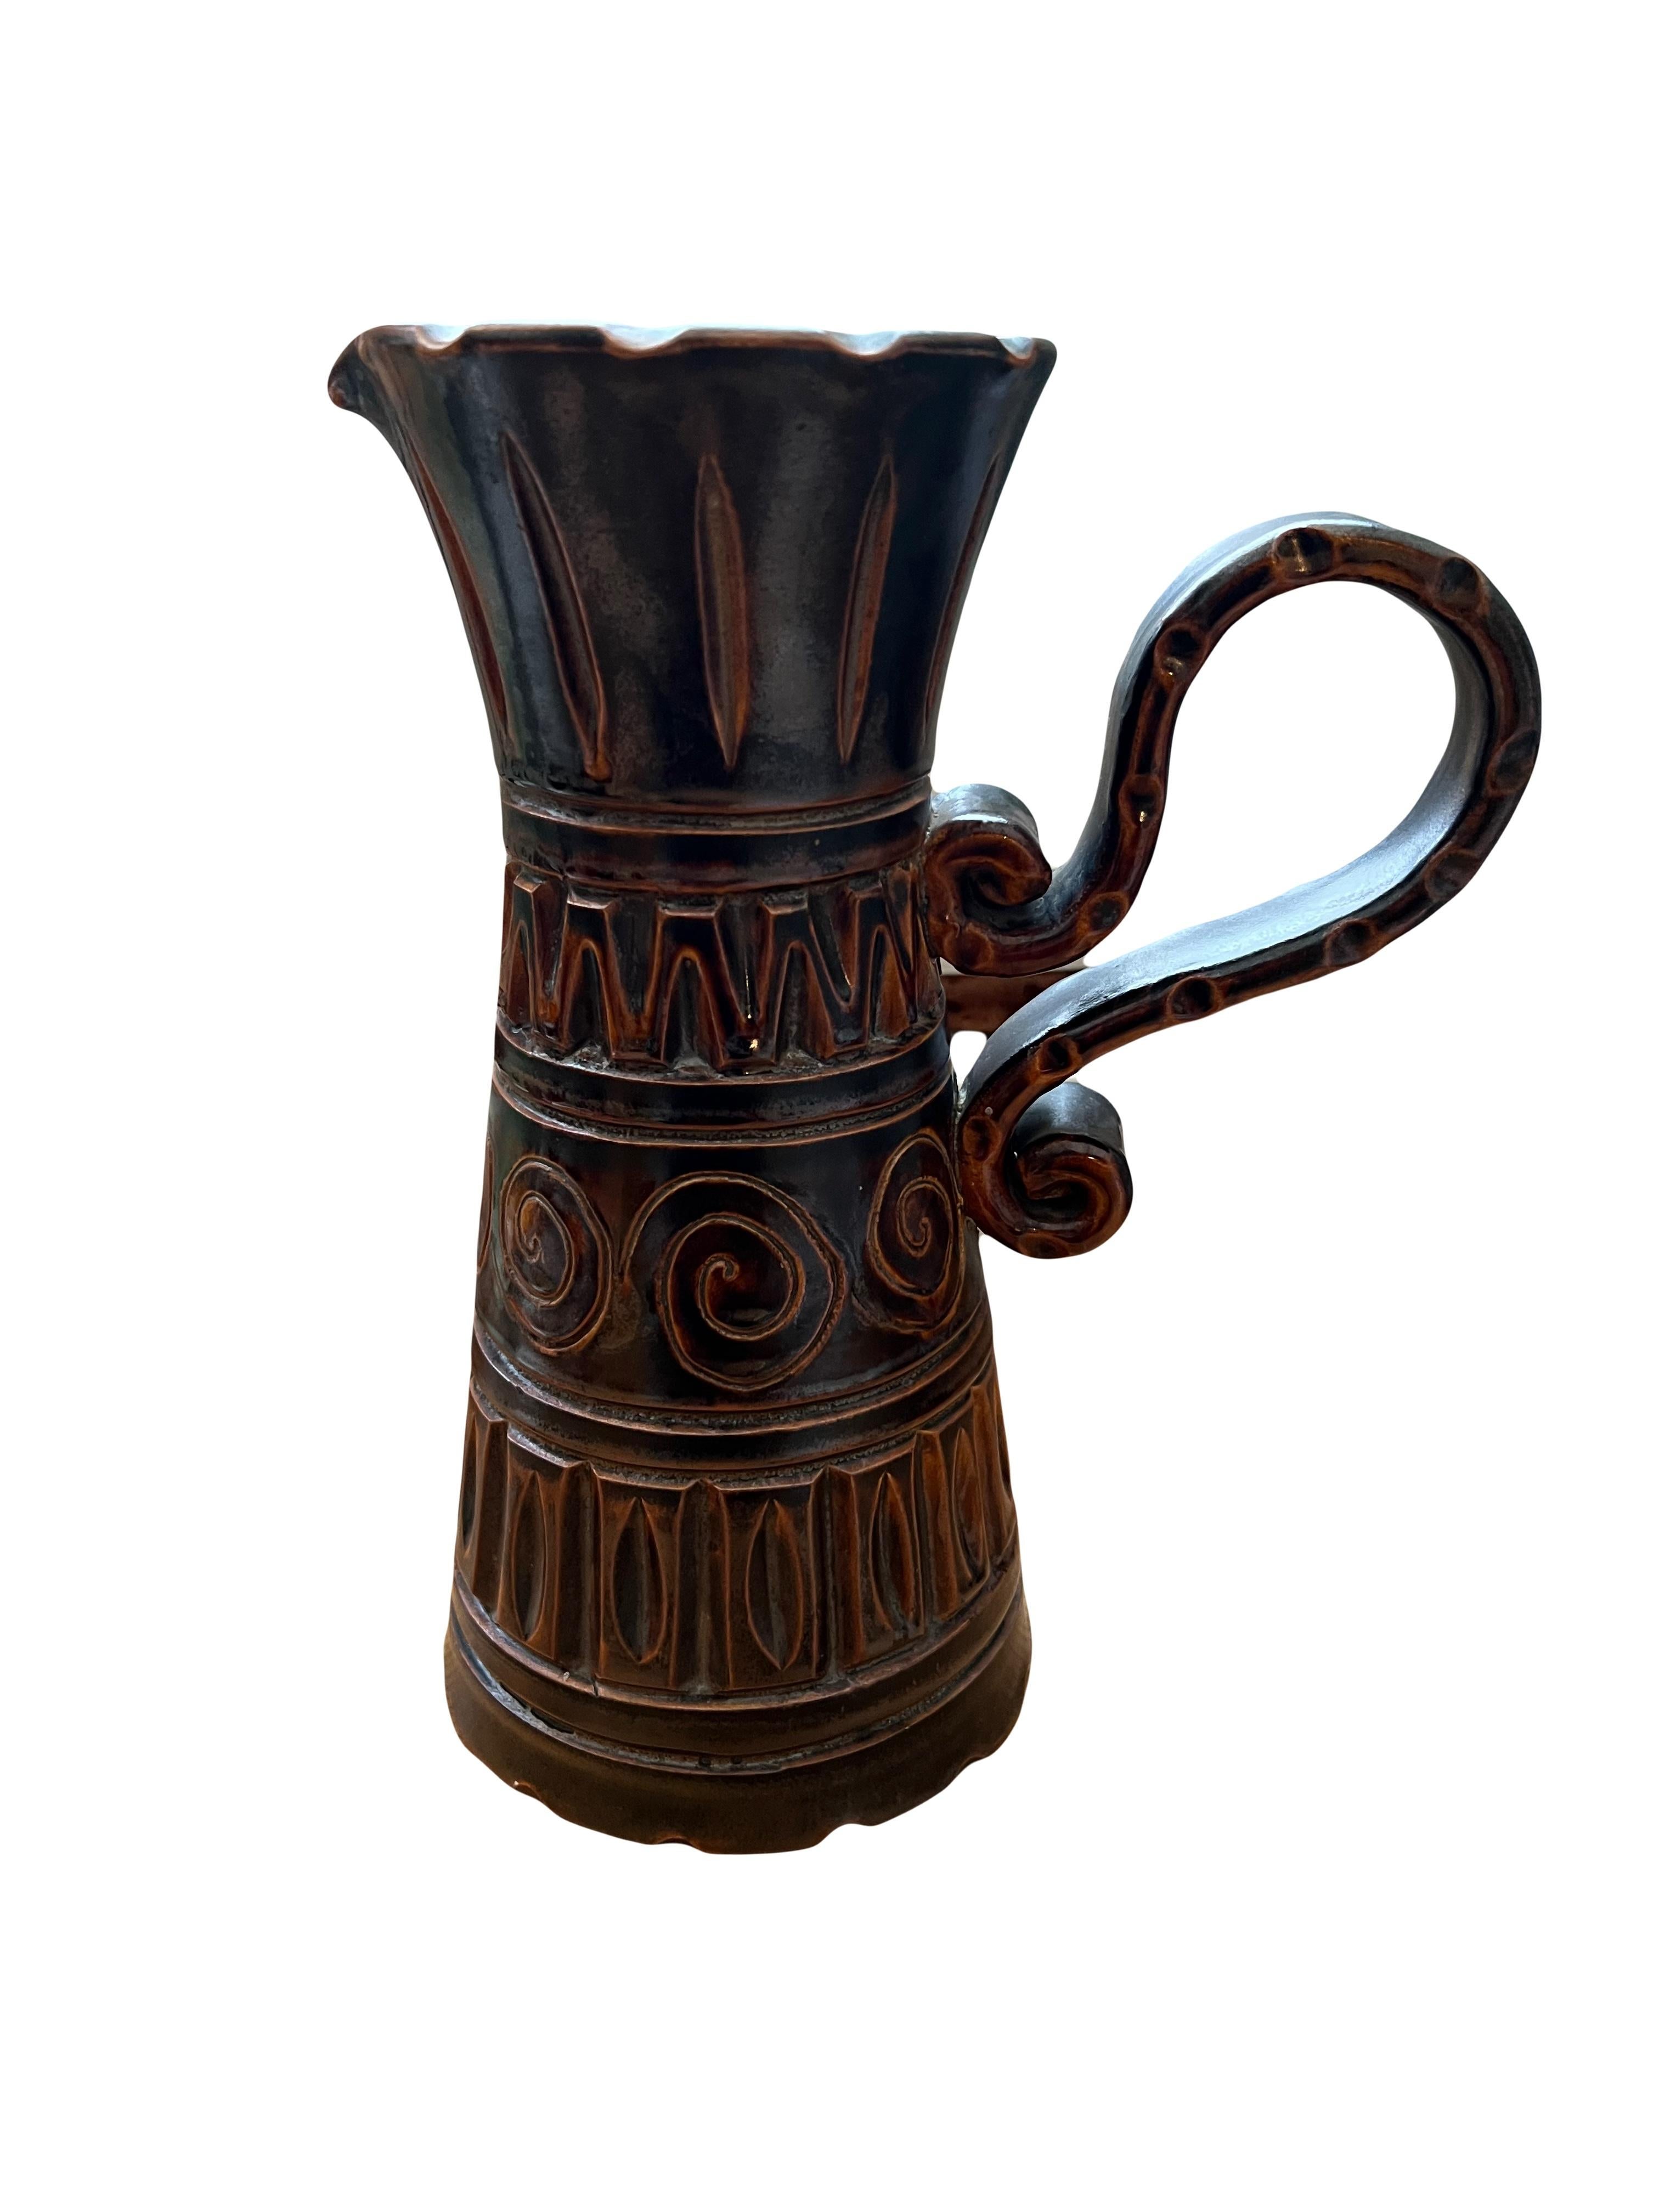 Orangeade Set by Huguette and Marius Bessone
A rare creation by the couple.

Pitcher set with 6 glasses in glazed brown ceramic featuring a rich incised graphic design inspired by tribal motifs, characteristic of the work of this artist couple. In